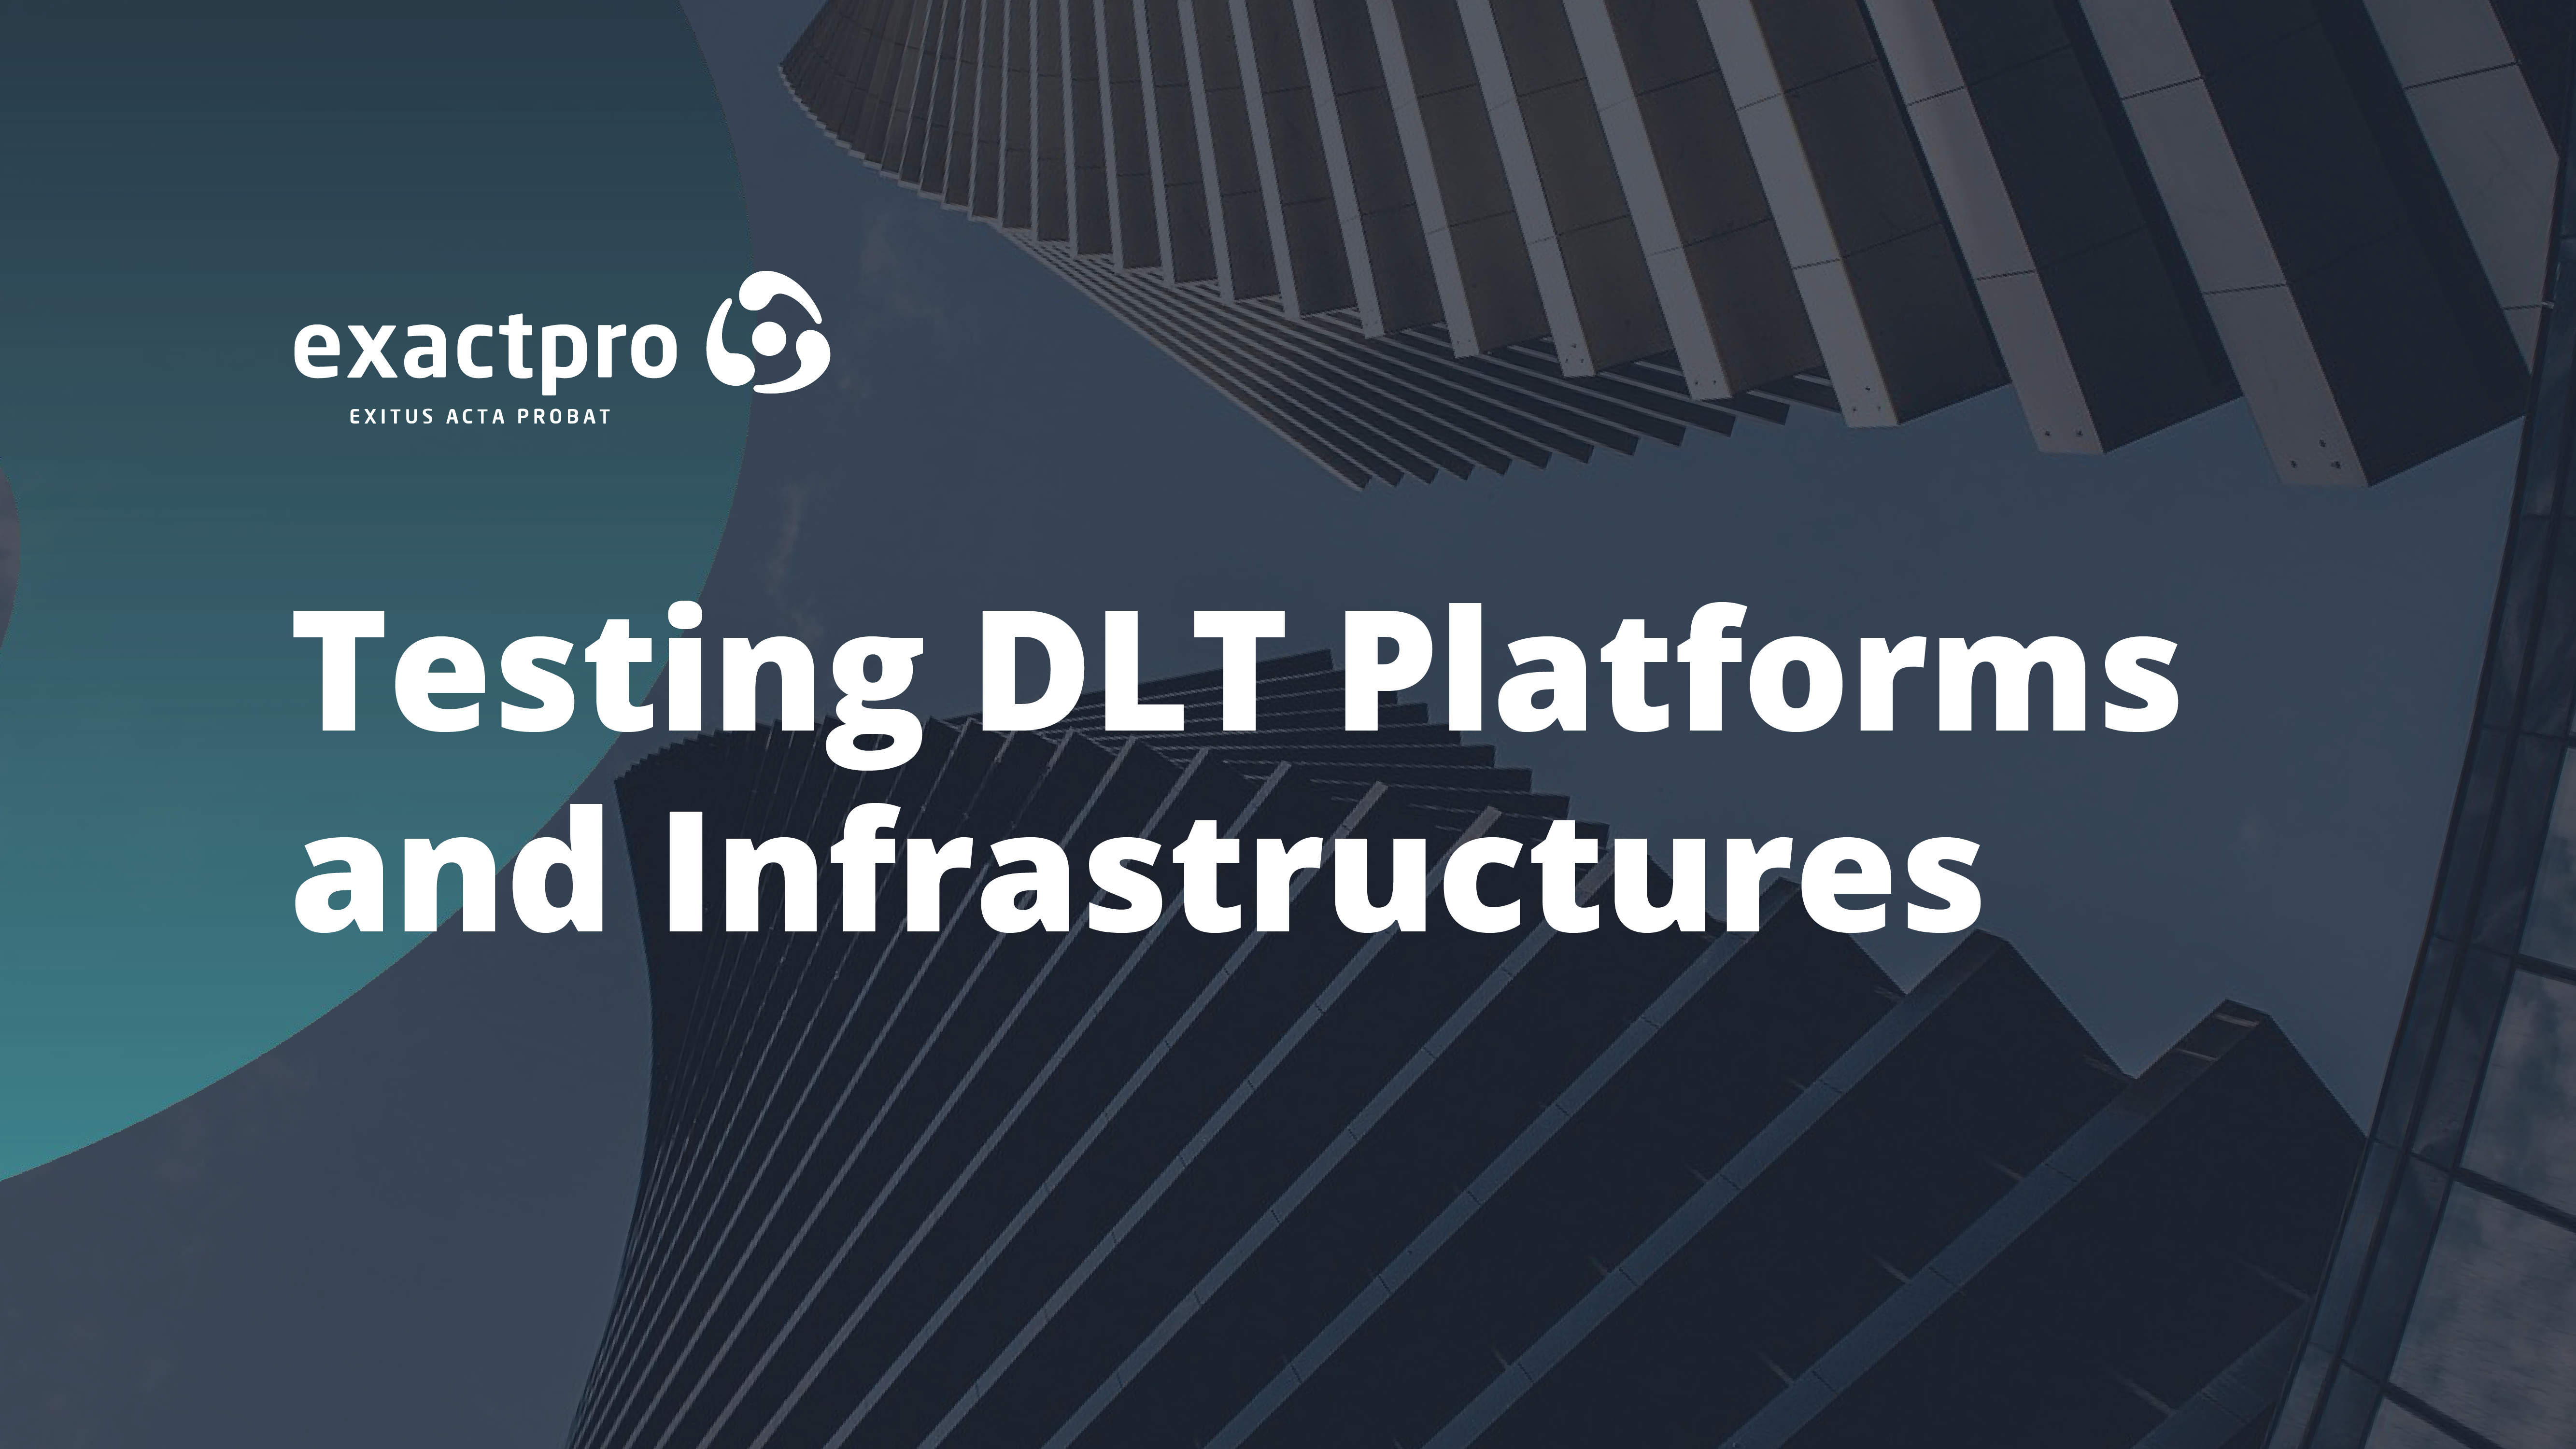 A Case Study for Testing Distributed Ledger Technology (DLT) Platforms and Infrastructures